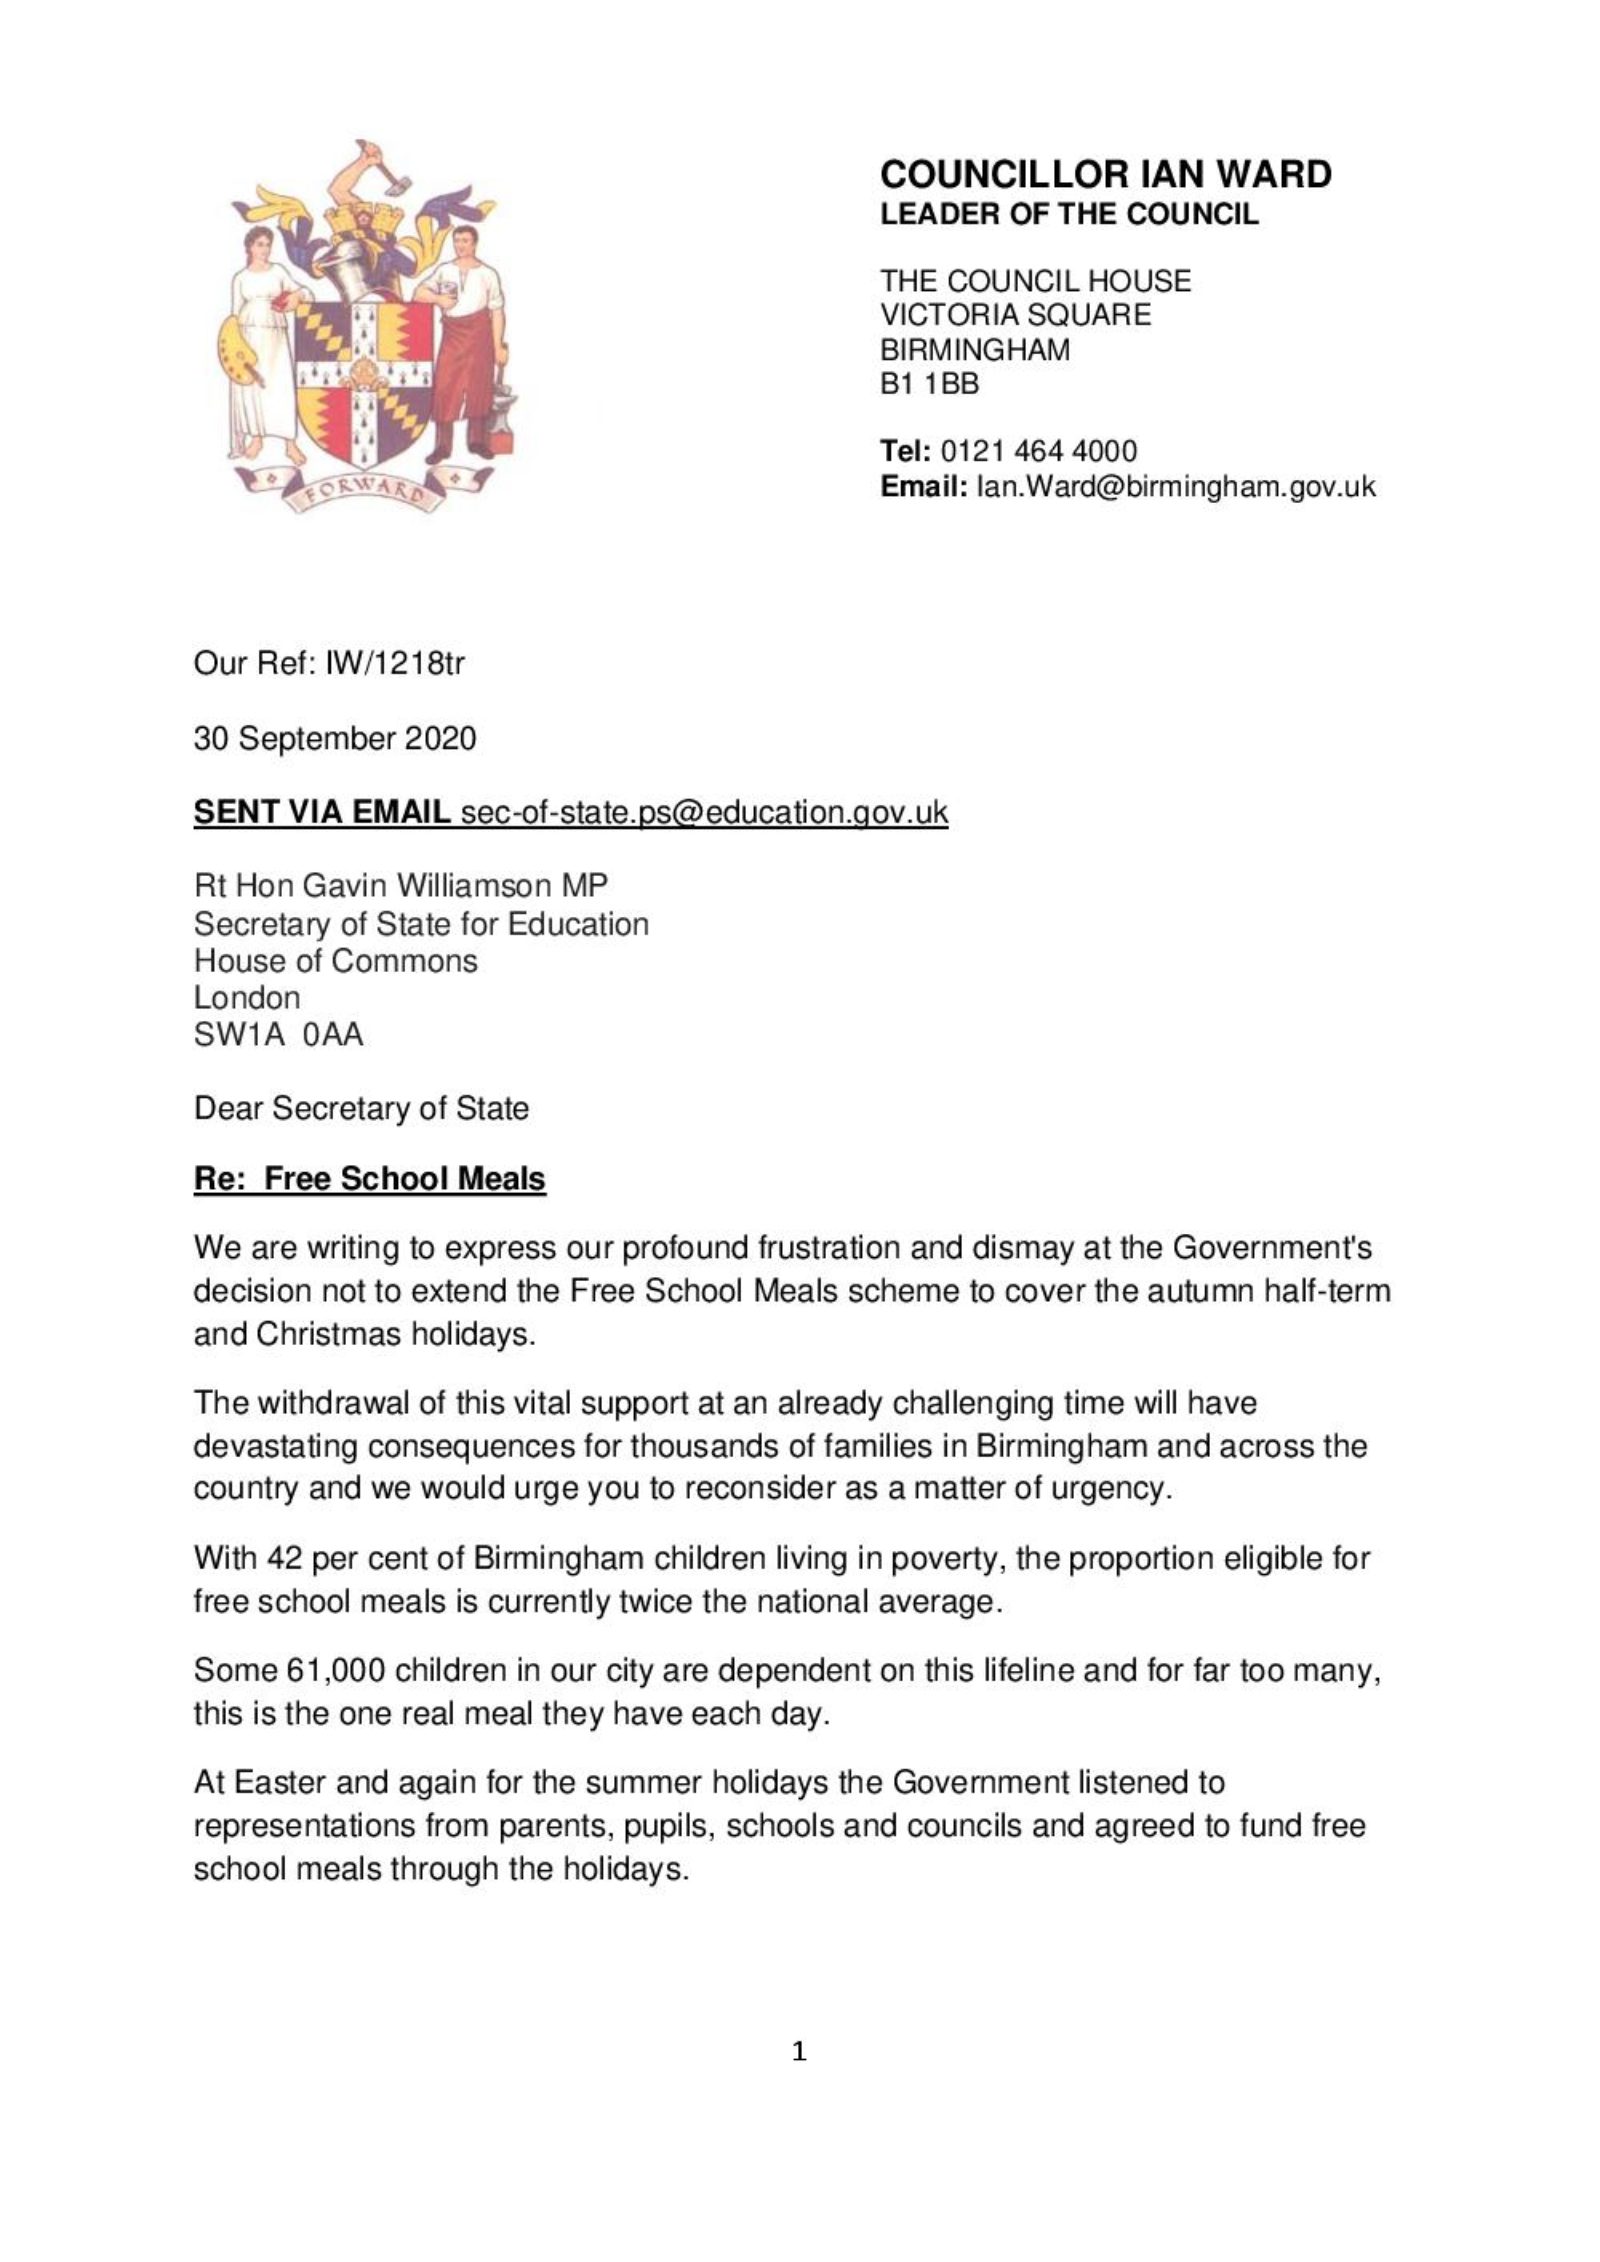 Our letter calling for help for pupils eligible for free school meals